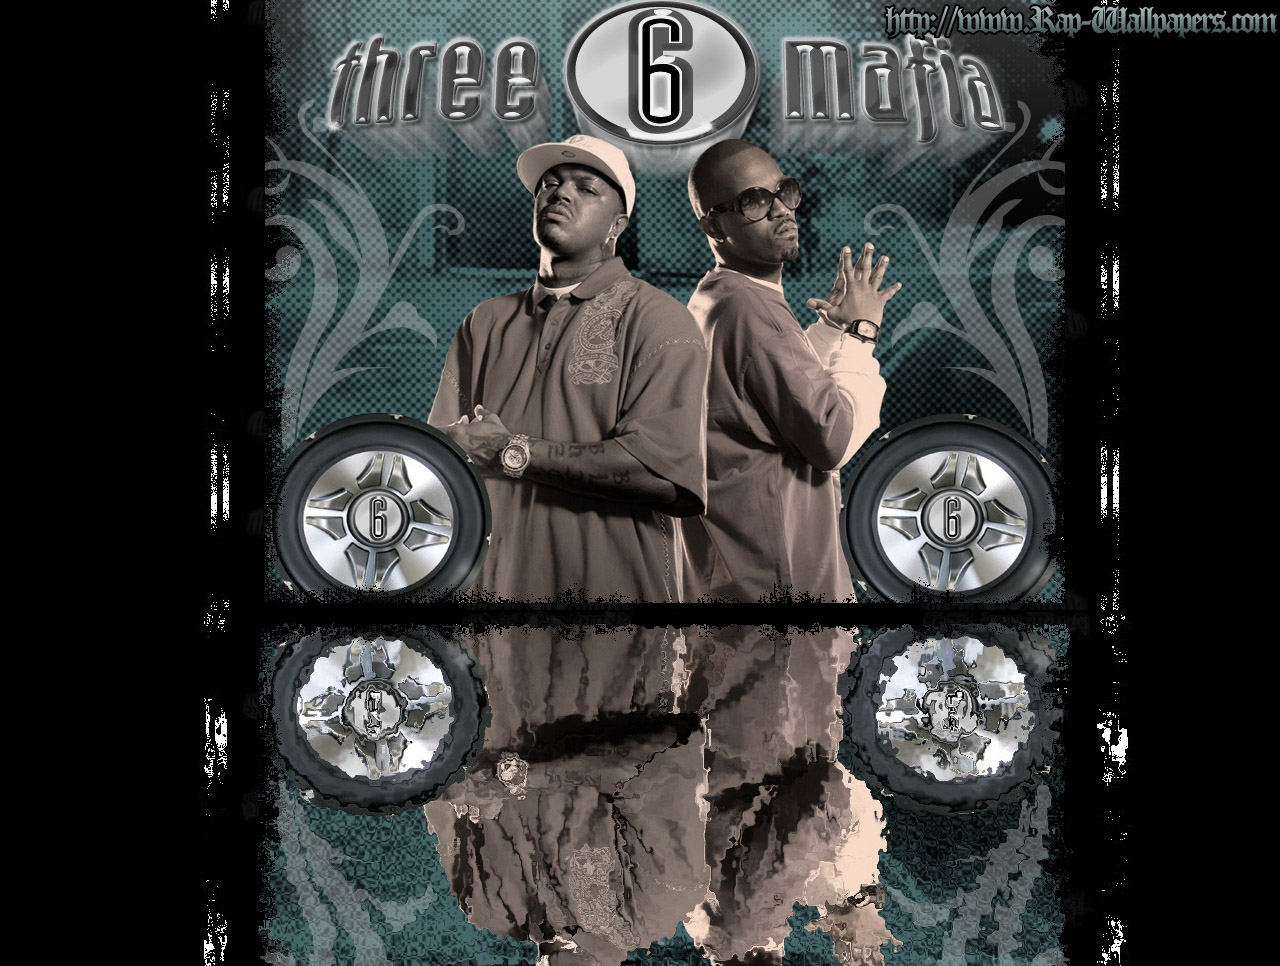  click on the wallpaper and choose 'Save Picture As' three 6 mafia 05